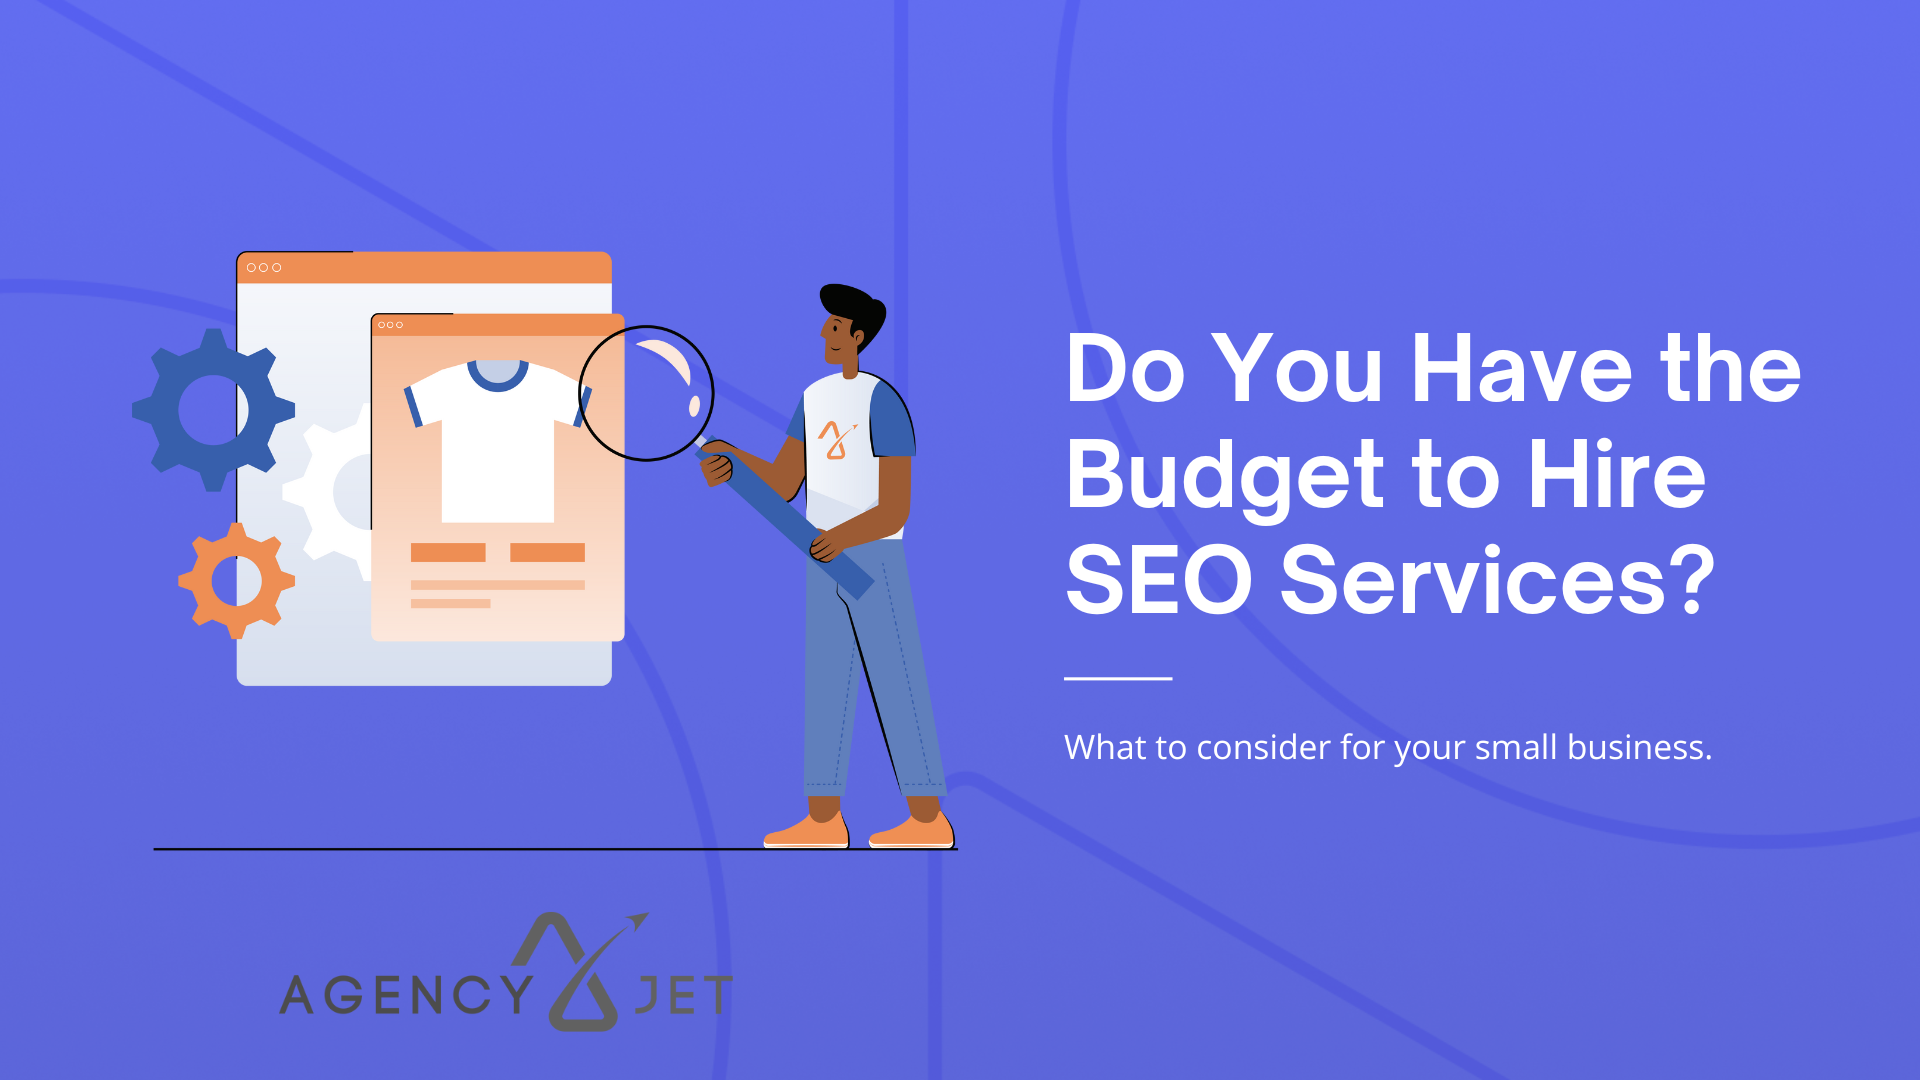 Do You Have the Budget to Hire SEO Services - Agency Jet